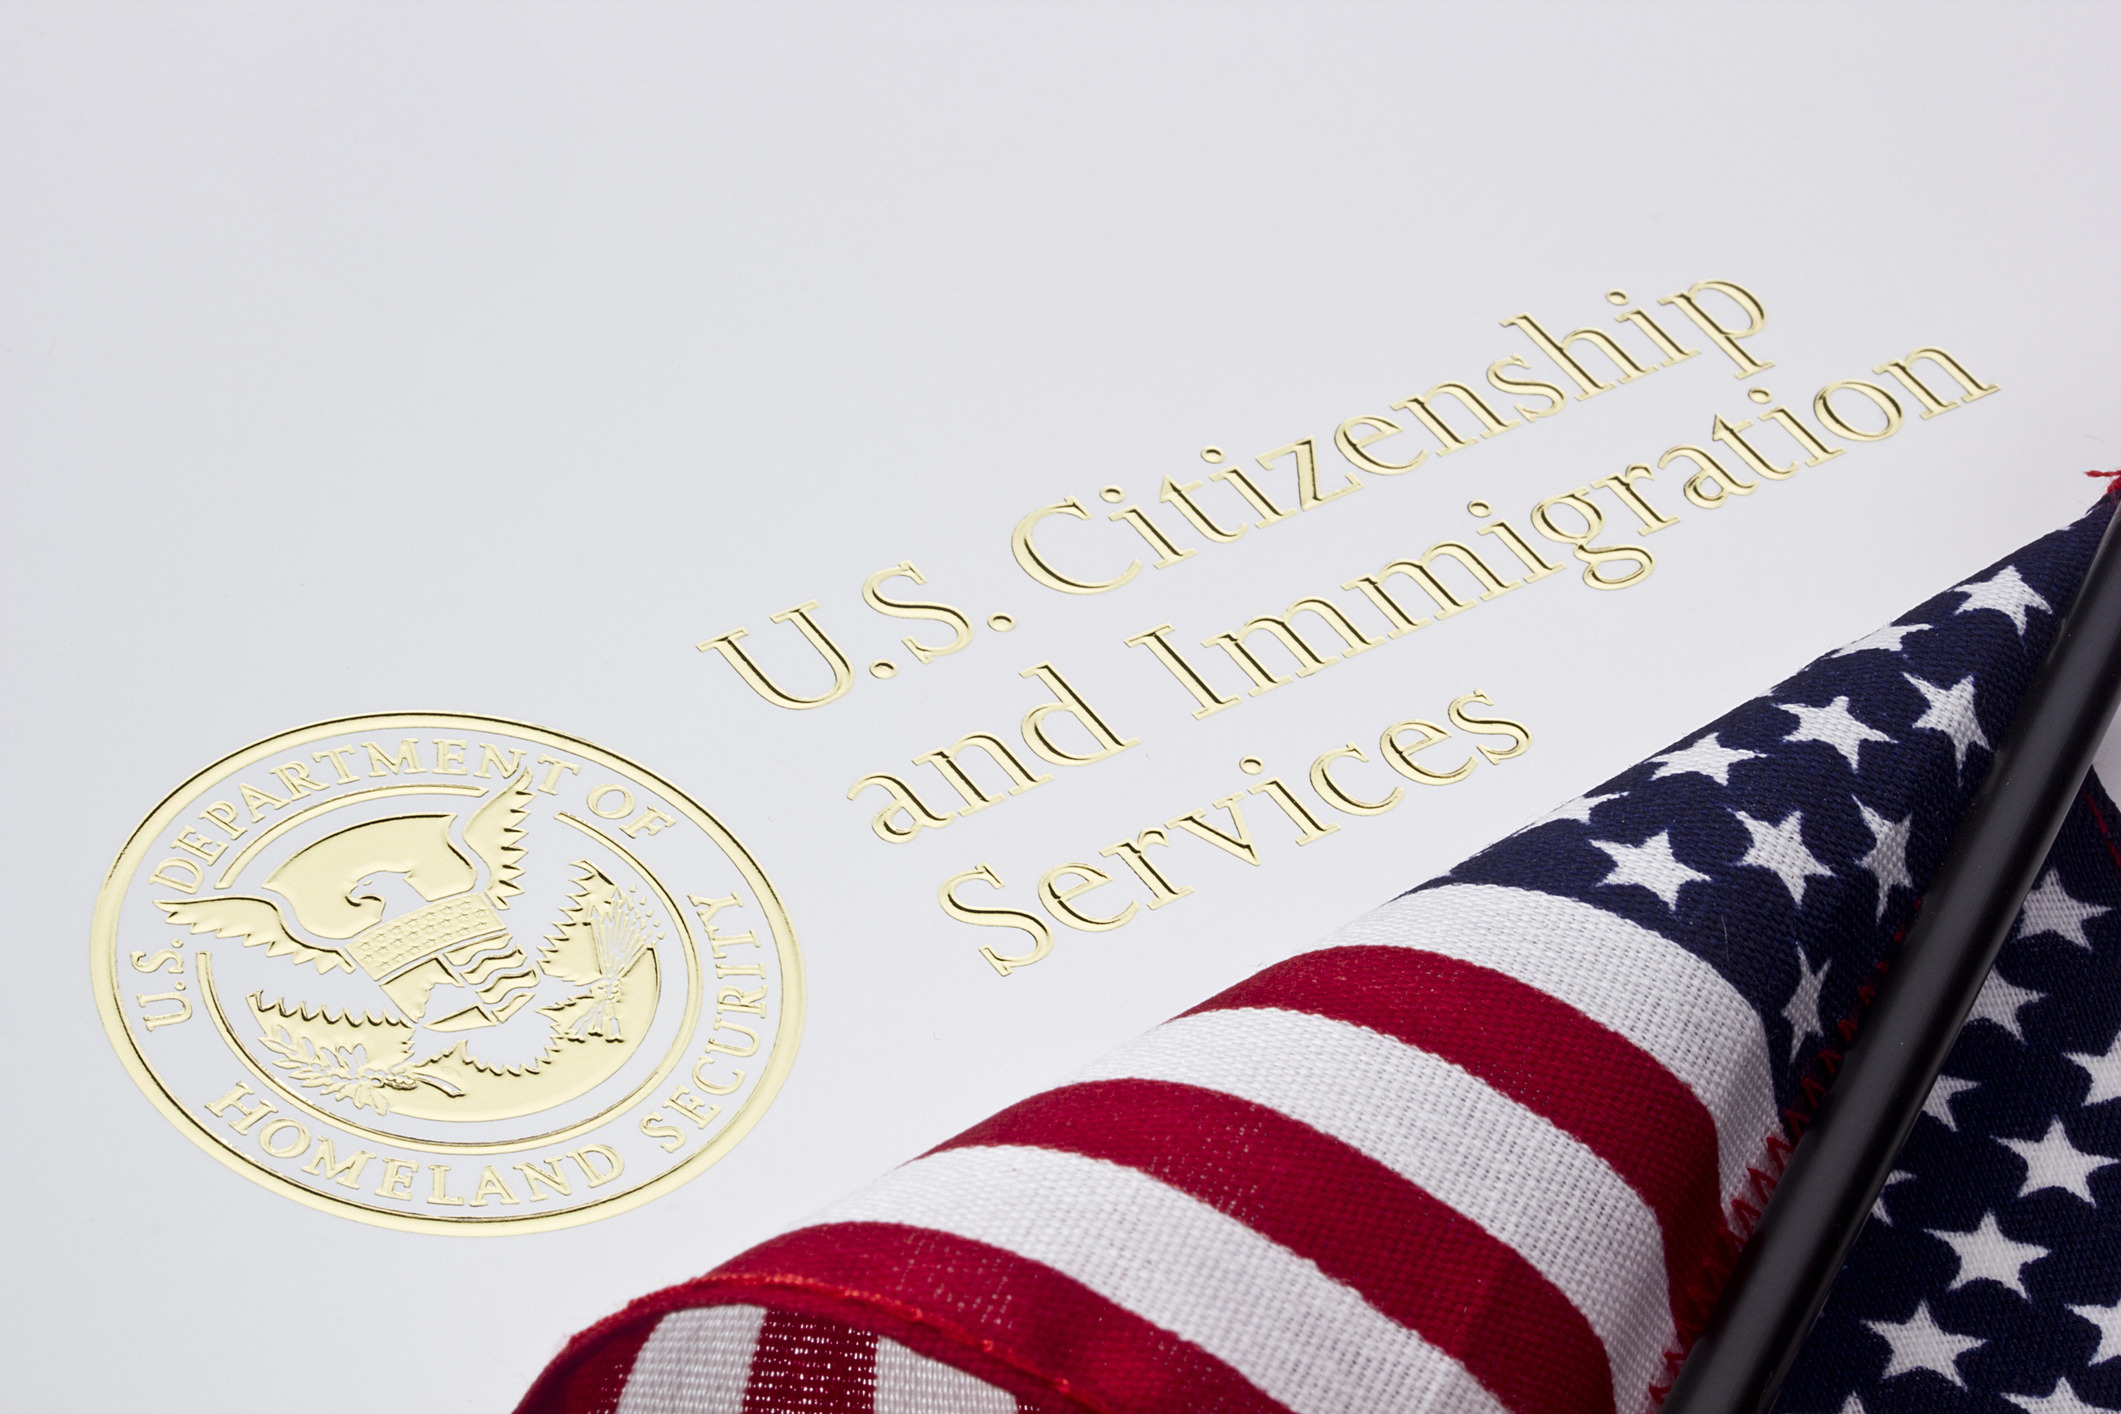 USCIS Halts Furlough of 70% of Workforce; Still Processing Times Likely To Increase